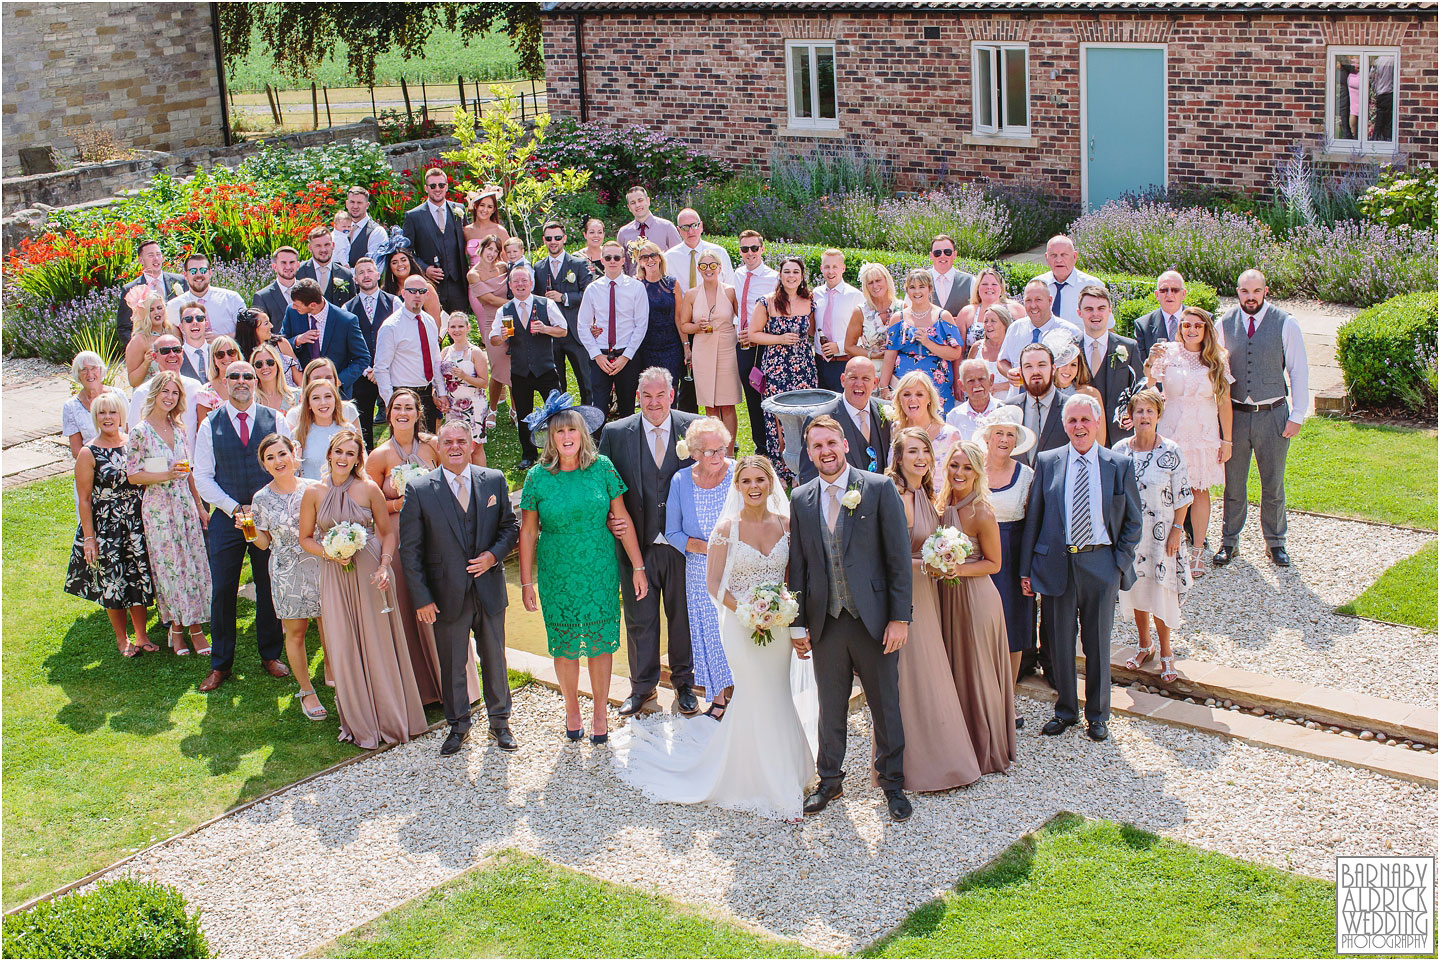 Wedding photography group shots at Priory Cottages near Wetherby in Yorkshire